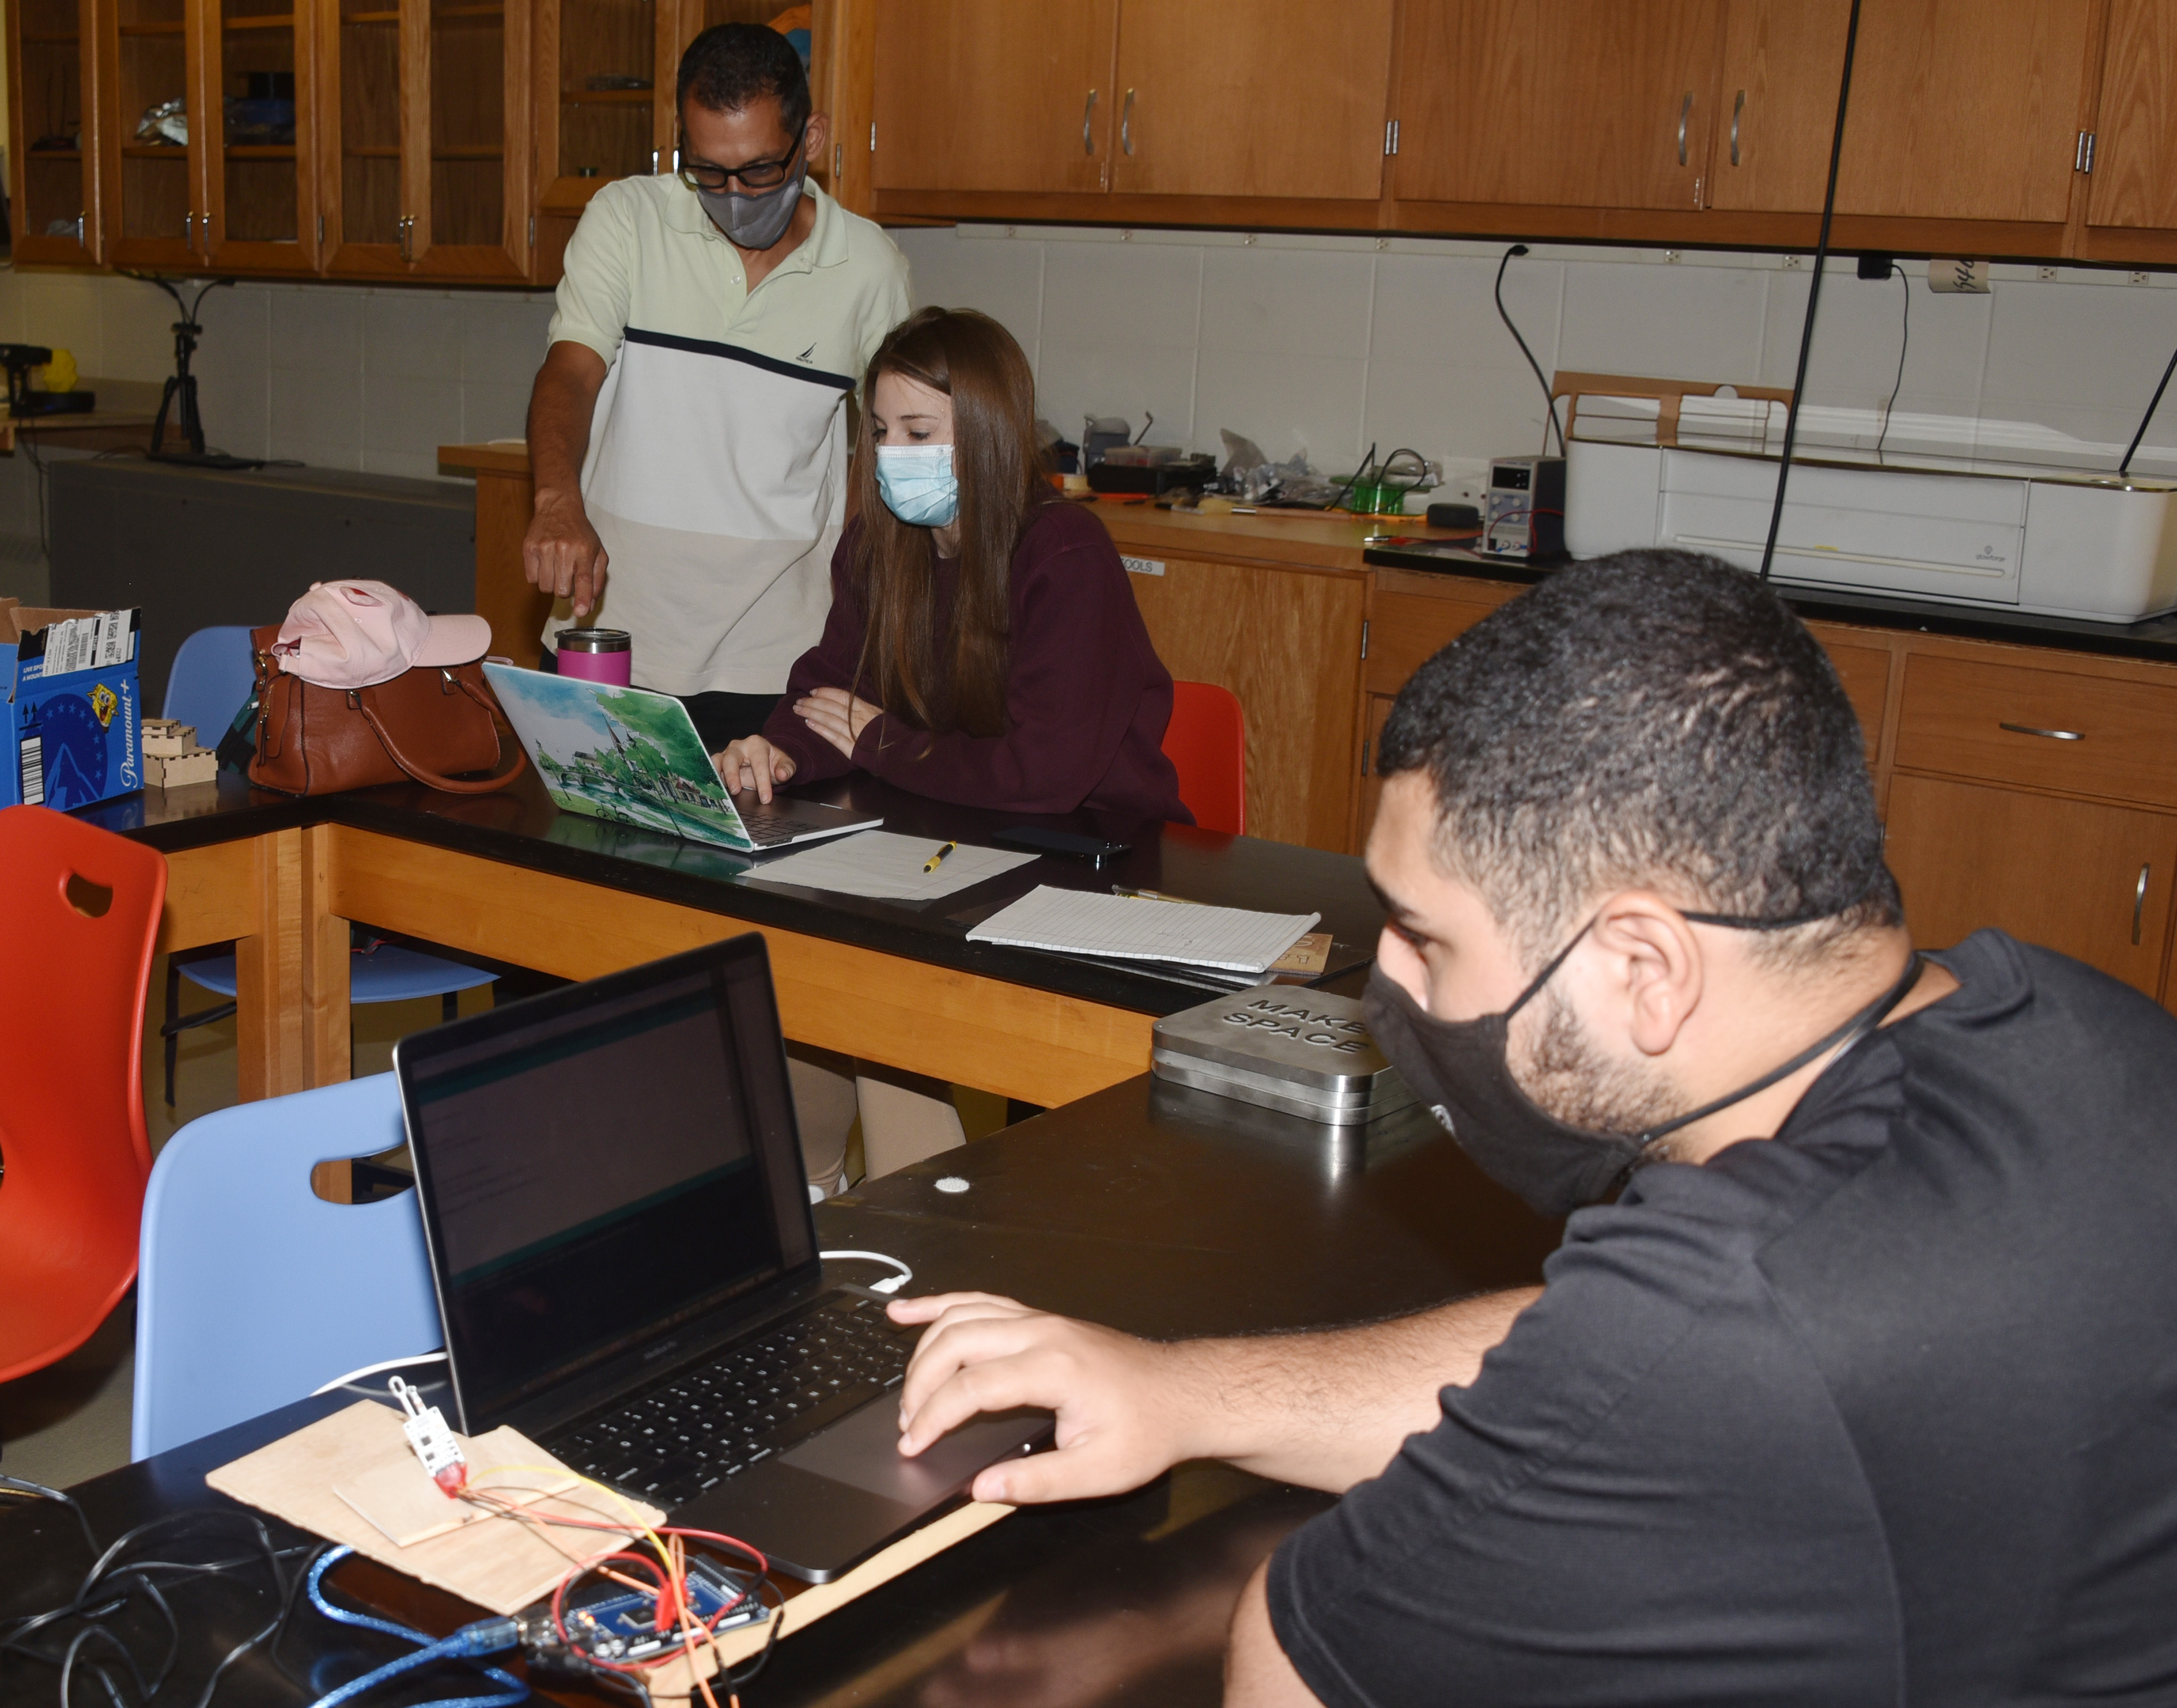 (L-r) Dr. Marwan Rasamny provides guidance to Sabrina Kruger and Abdullah Al-Rubaye in the Maker Space.